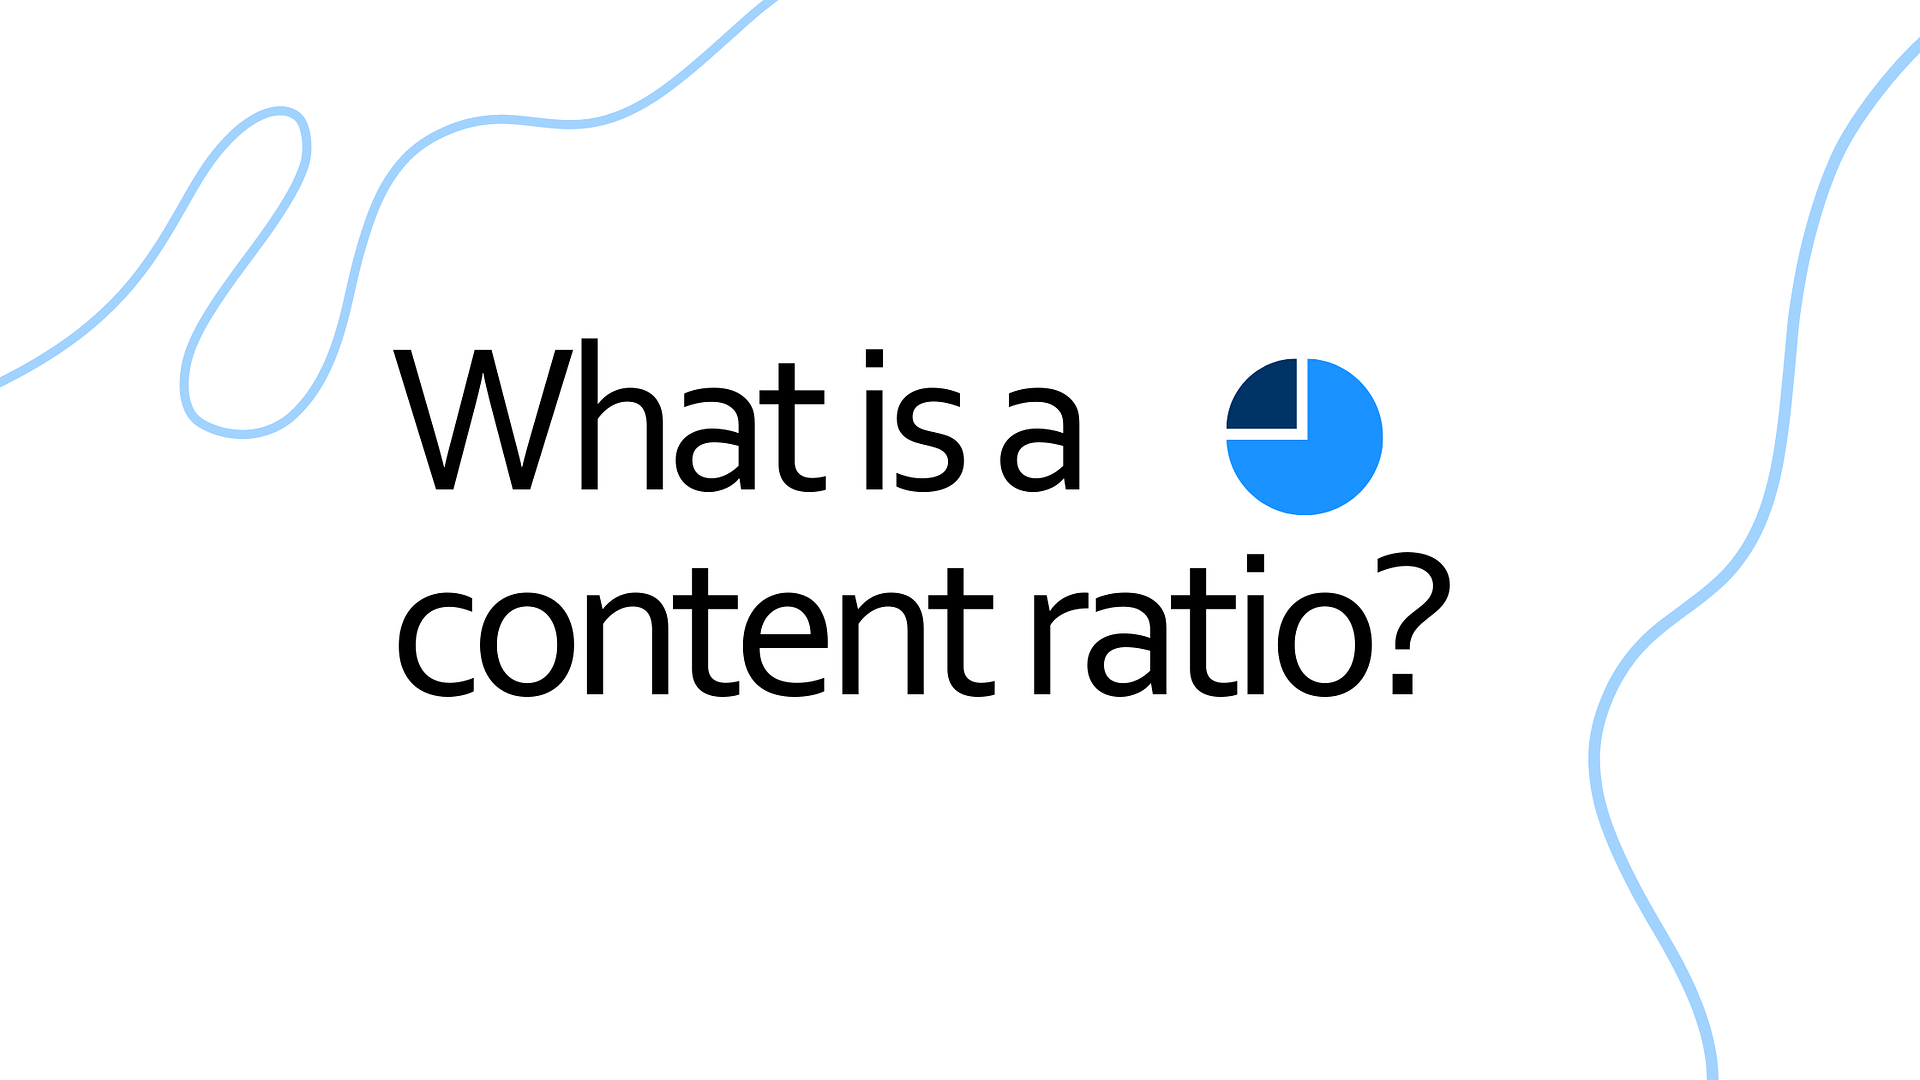 What is a content ratio?